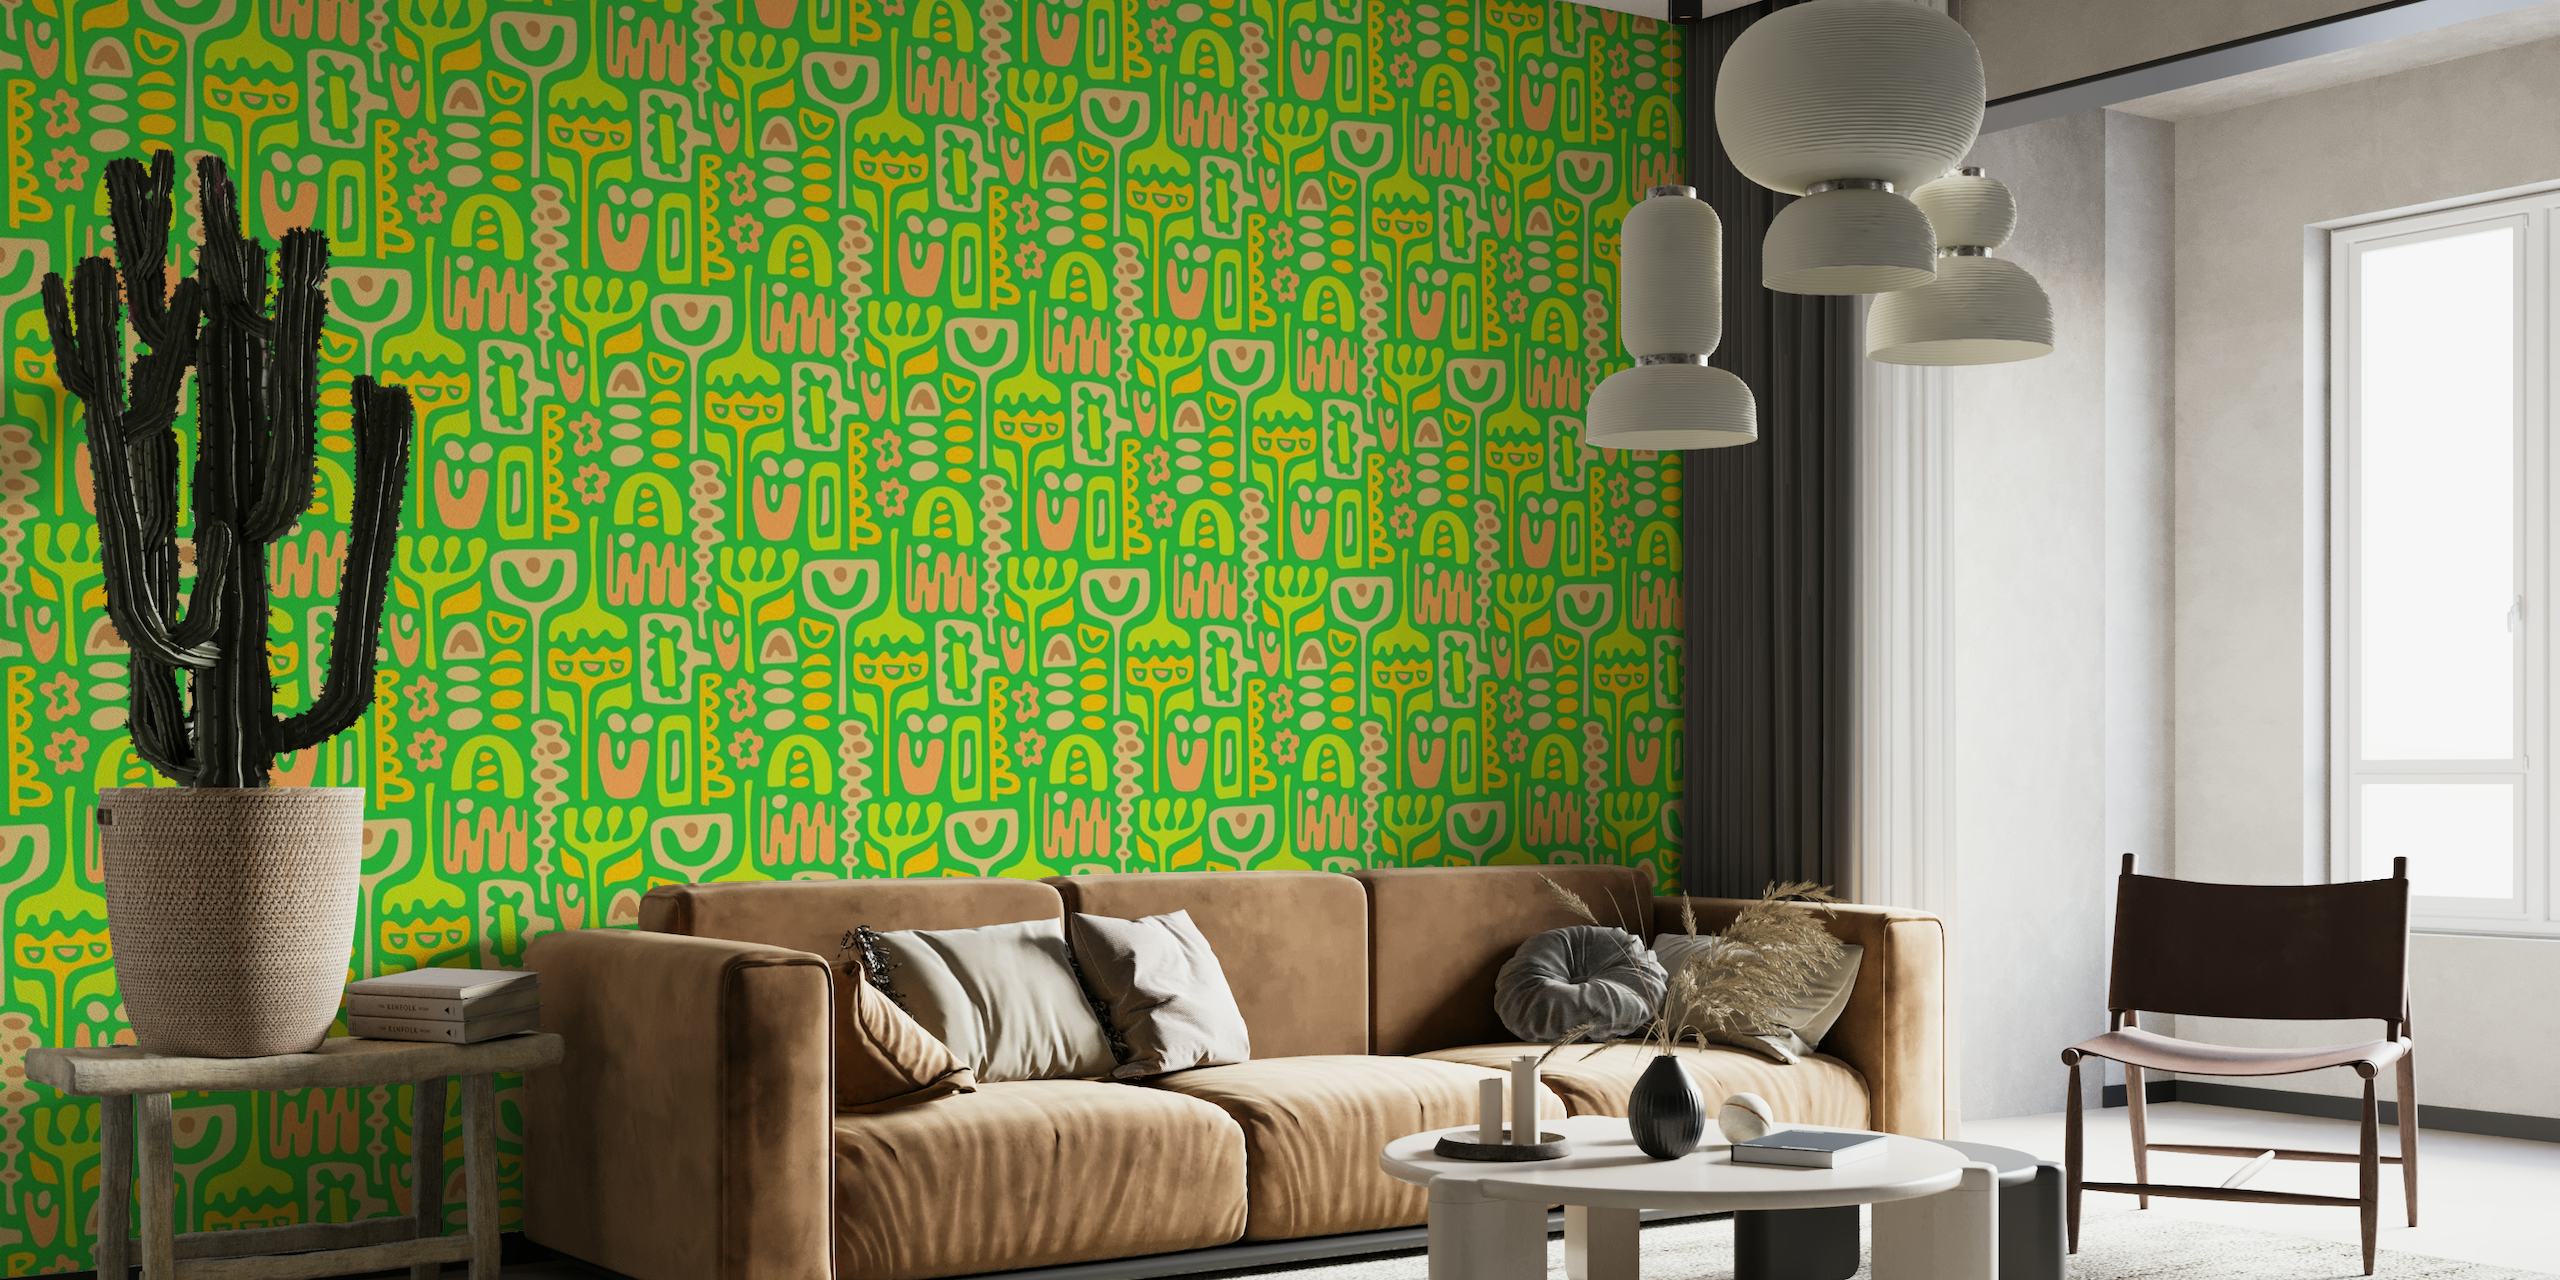 Abstract retro floral pattern in kelly green for wall mural